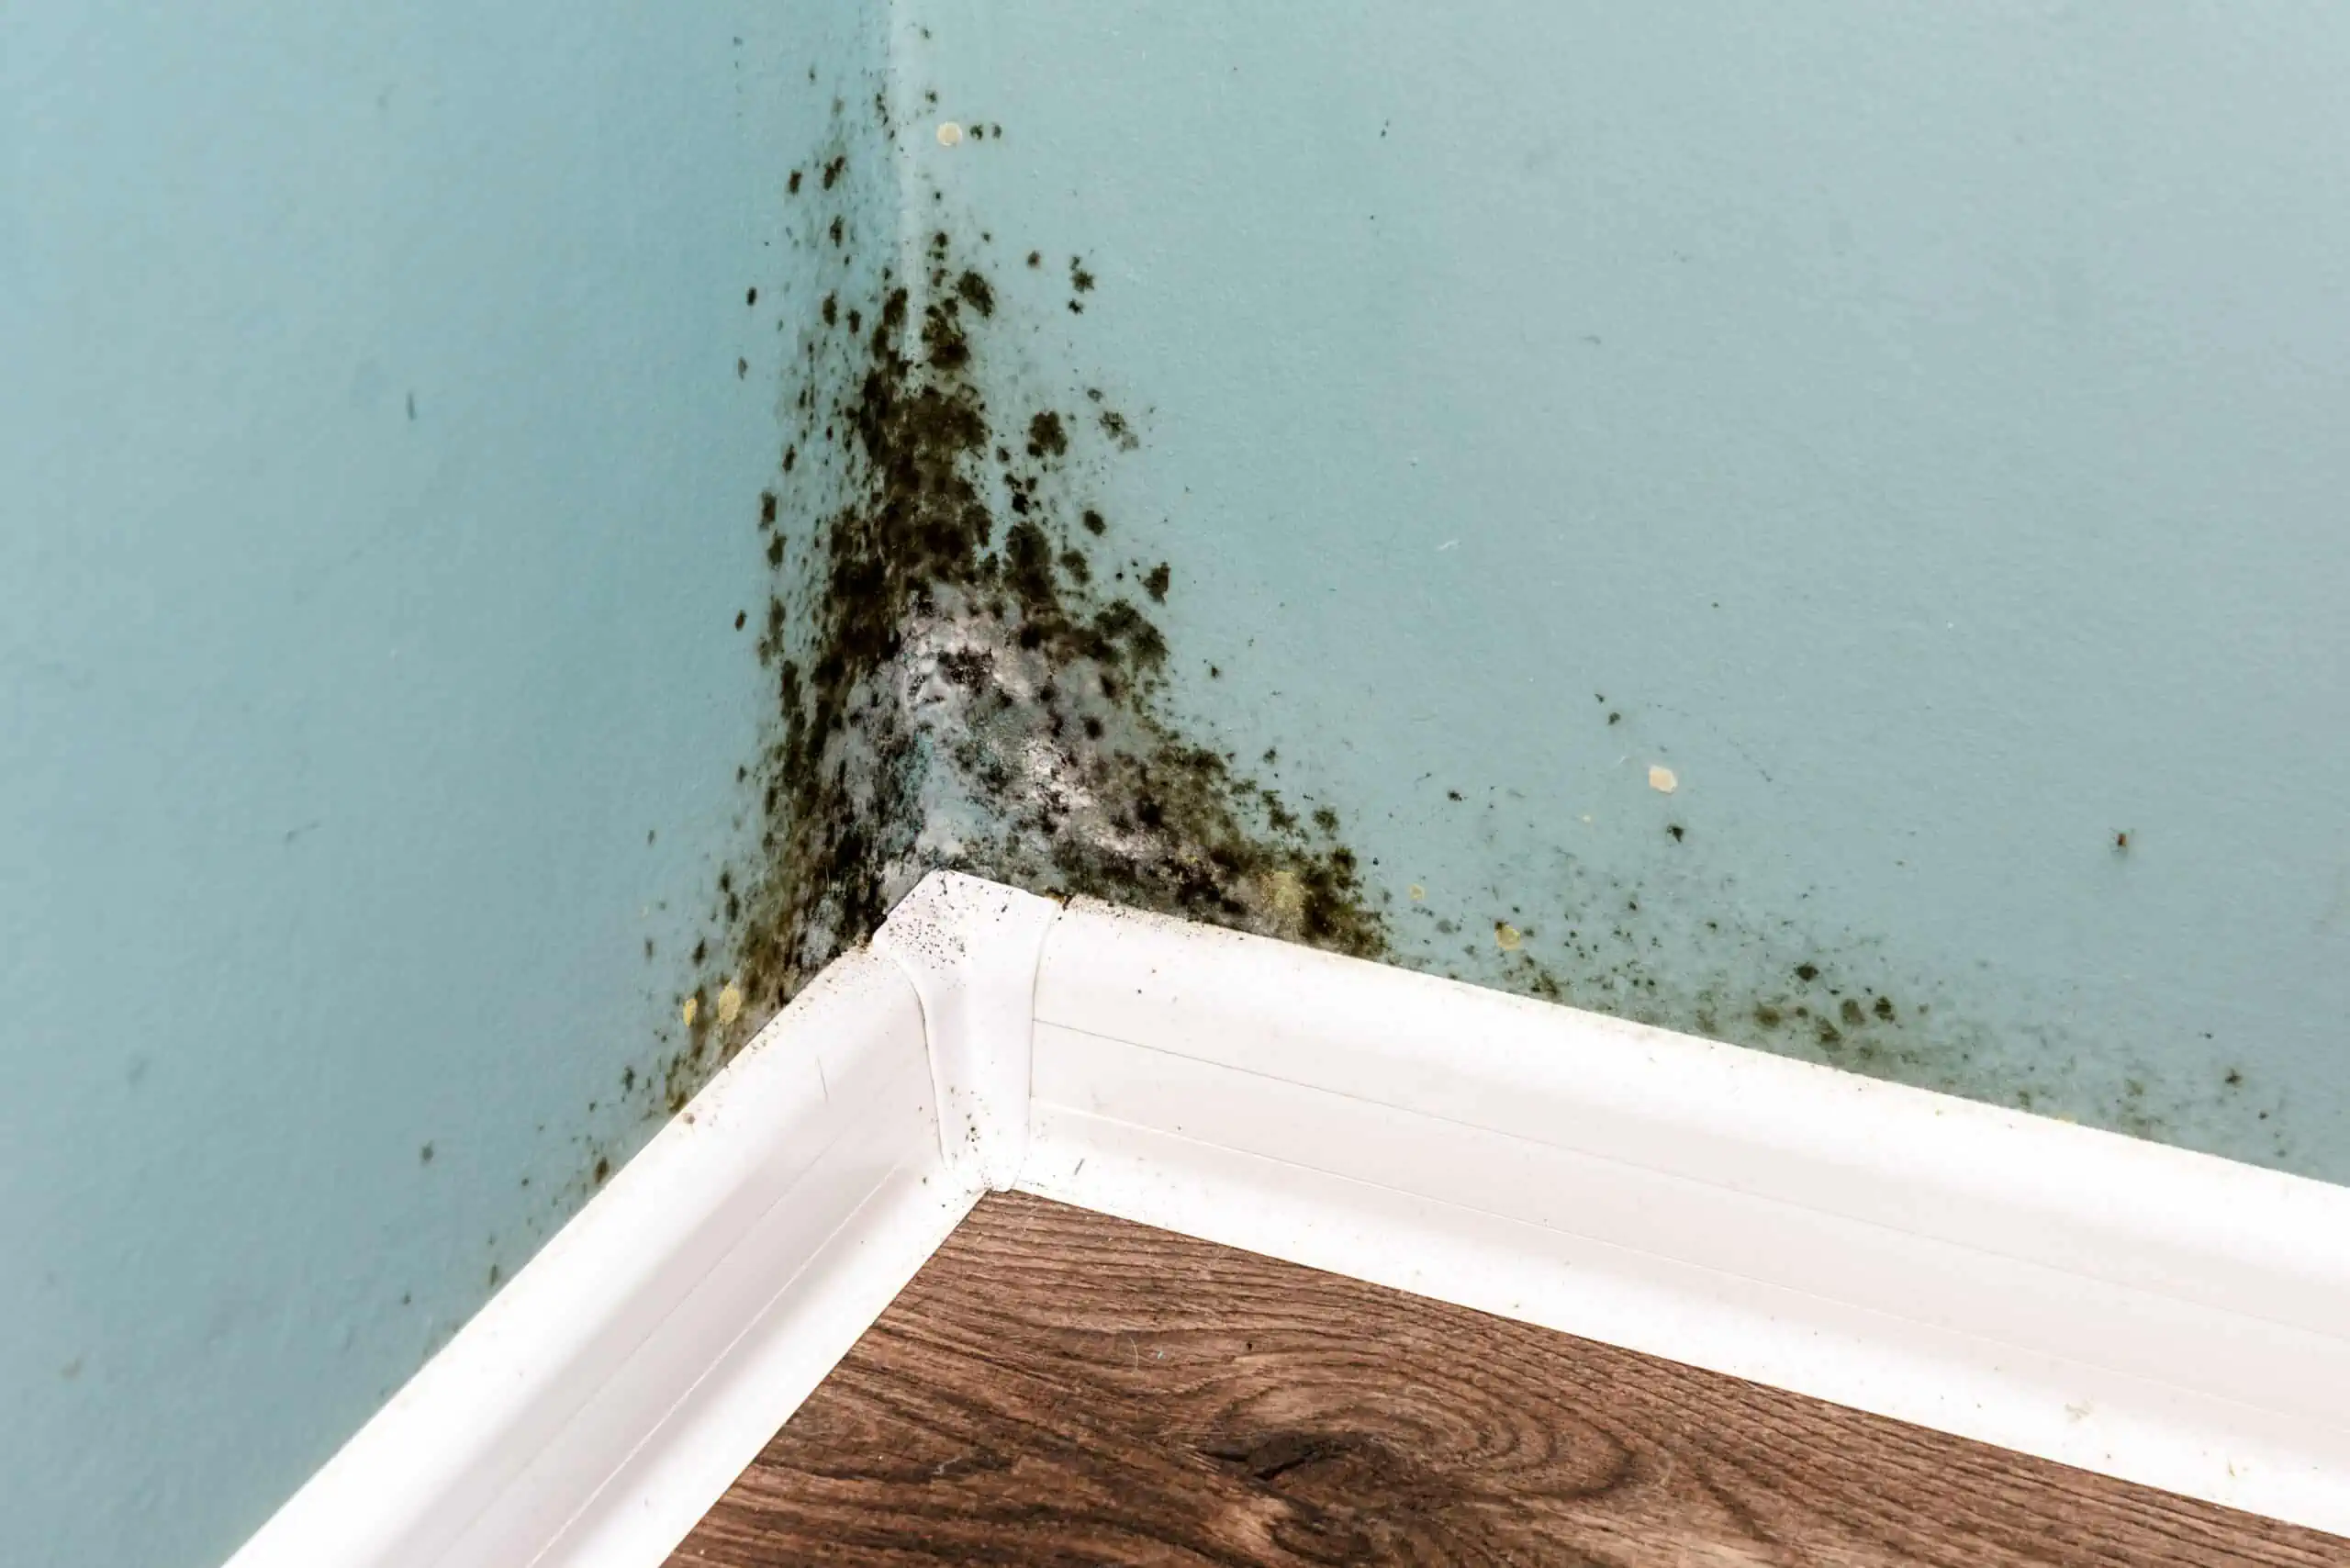 3 Signs of Black Fungus (Toxic Black Mold) in Your Home